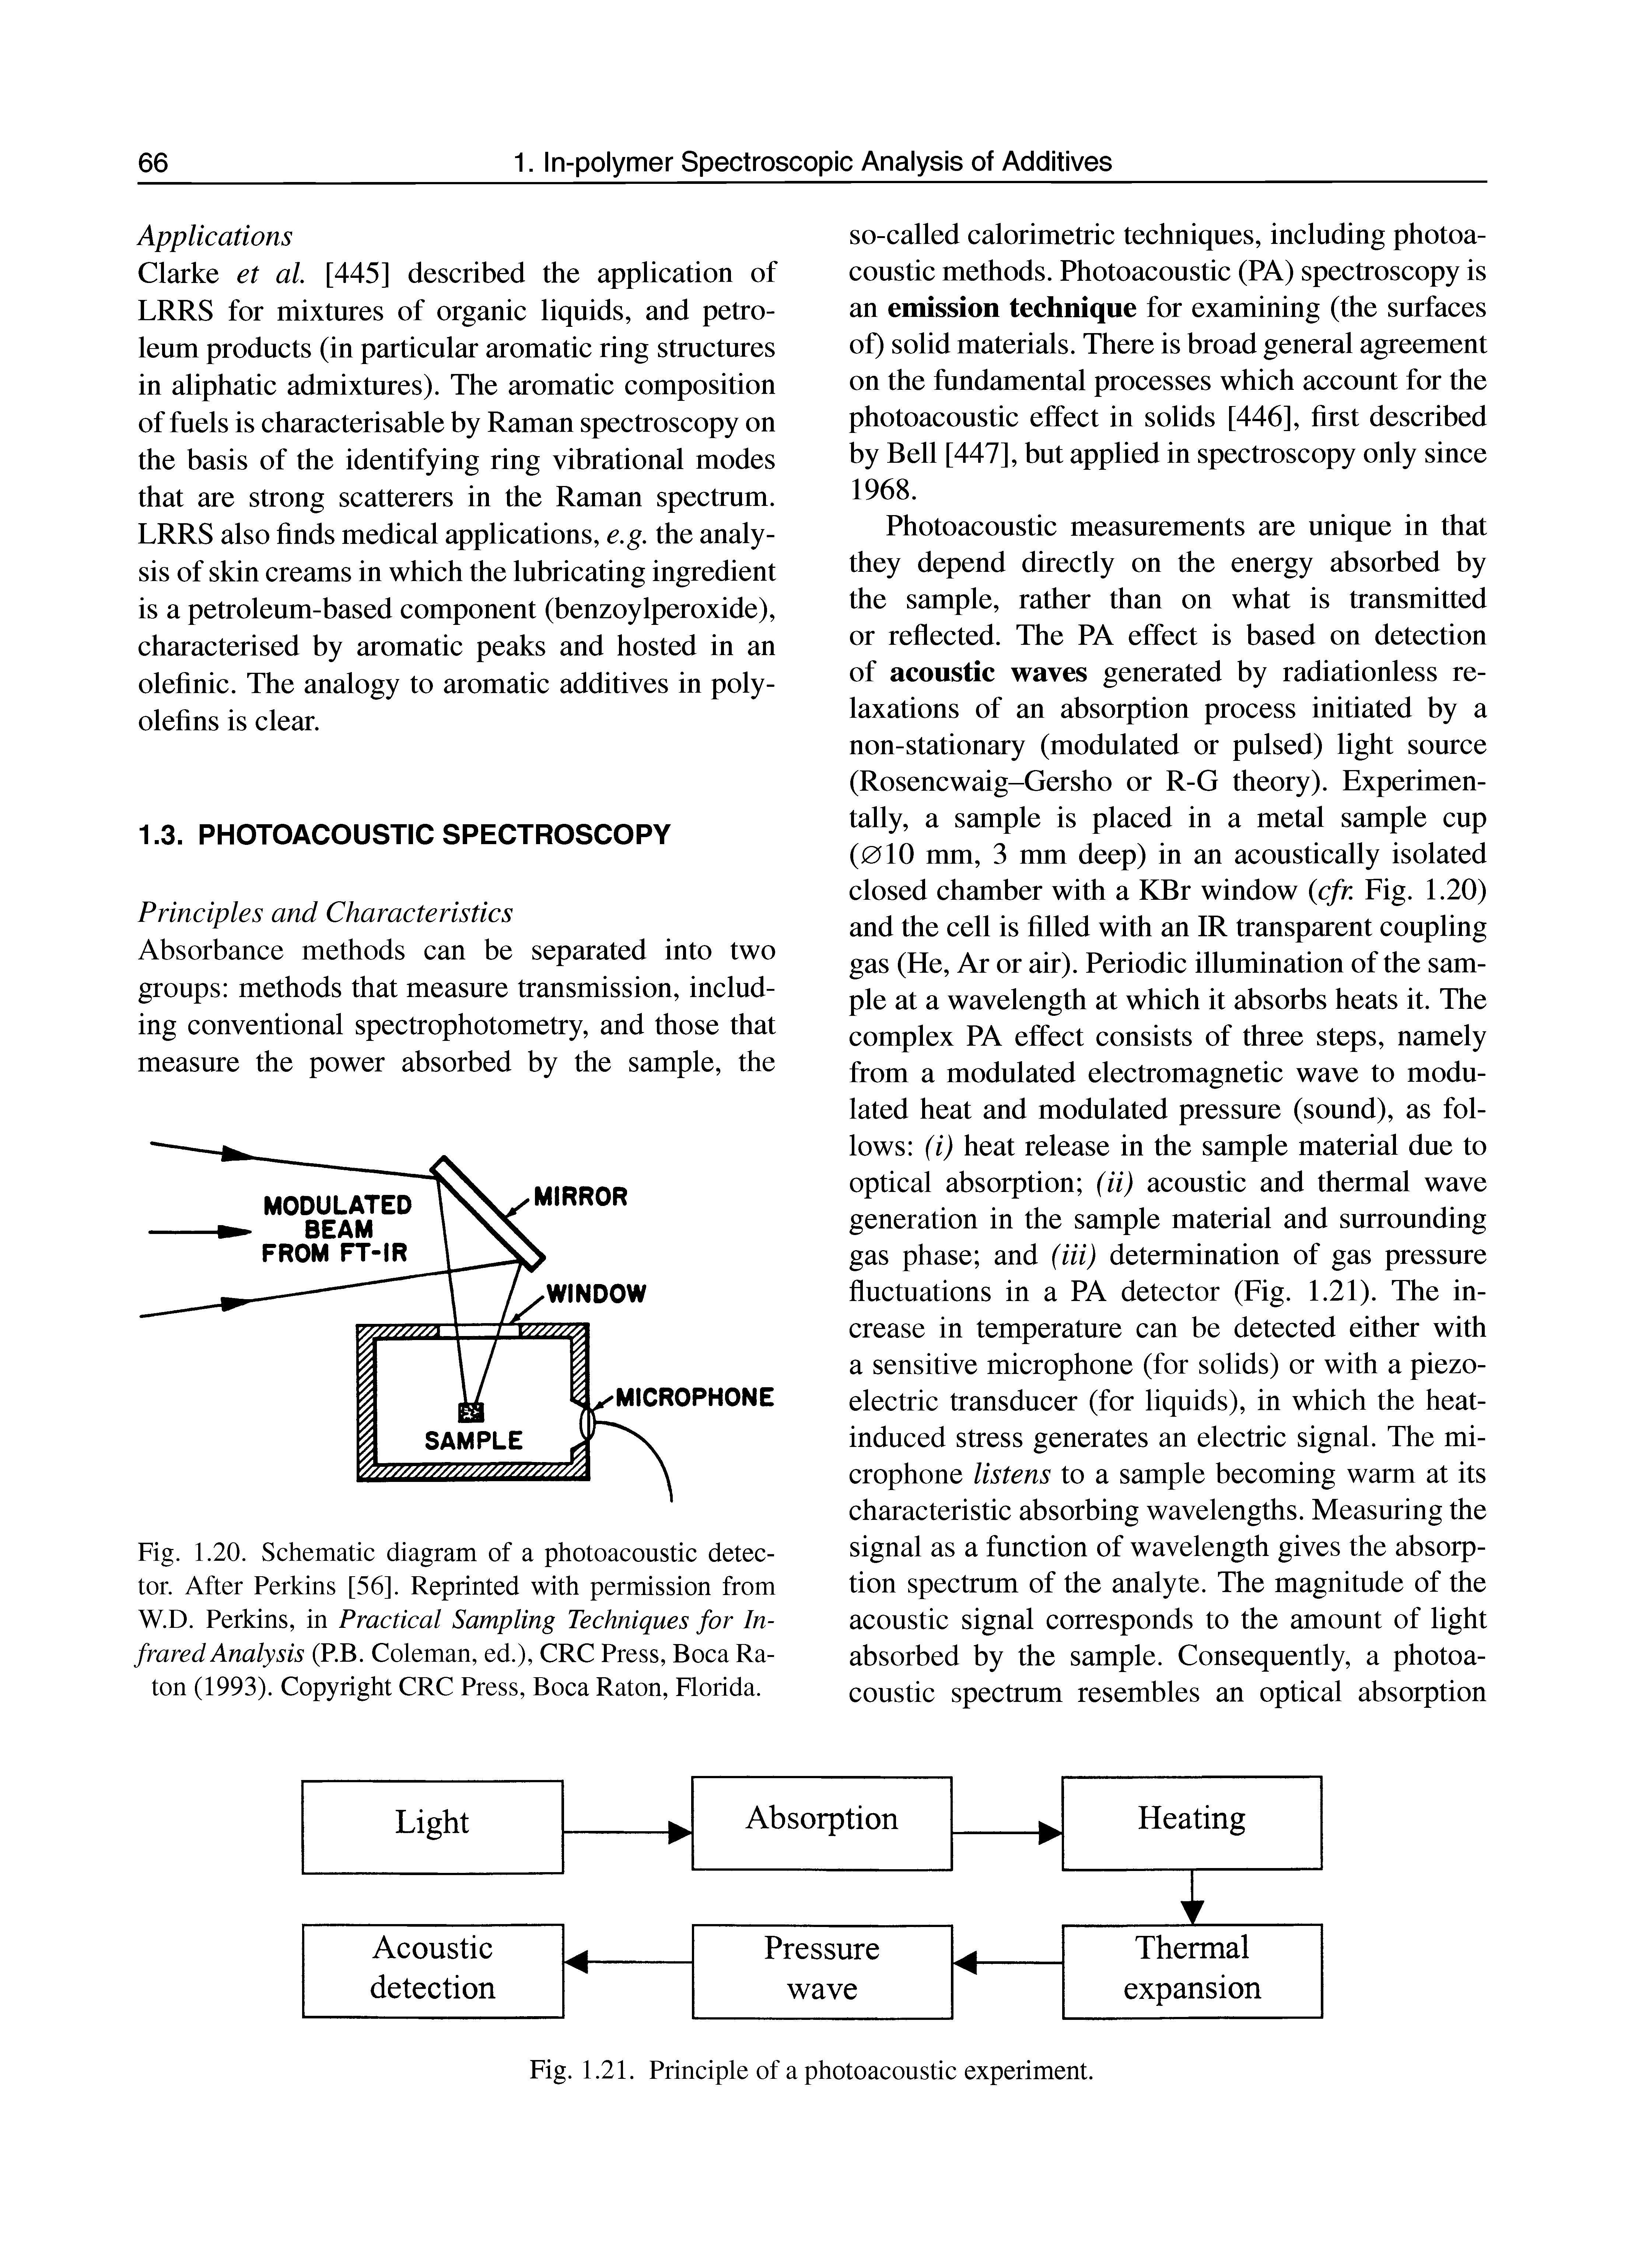 Fig. 1.20. Schematic diagram of a photoacoustic detector. After Perkins [56]. Reprinted with permission from W.D. Perkins, in Practical Sampling Techniques for Infrared Analysis (PB. Coleman, ed.), CRC Press, Boca Raton (1993). Copyright CRC Press, Boca Raton, Florida.